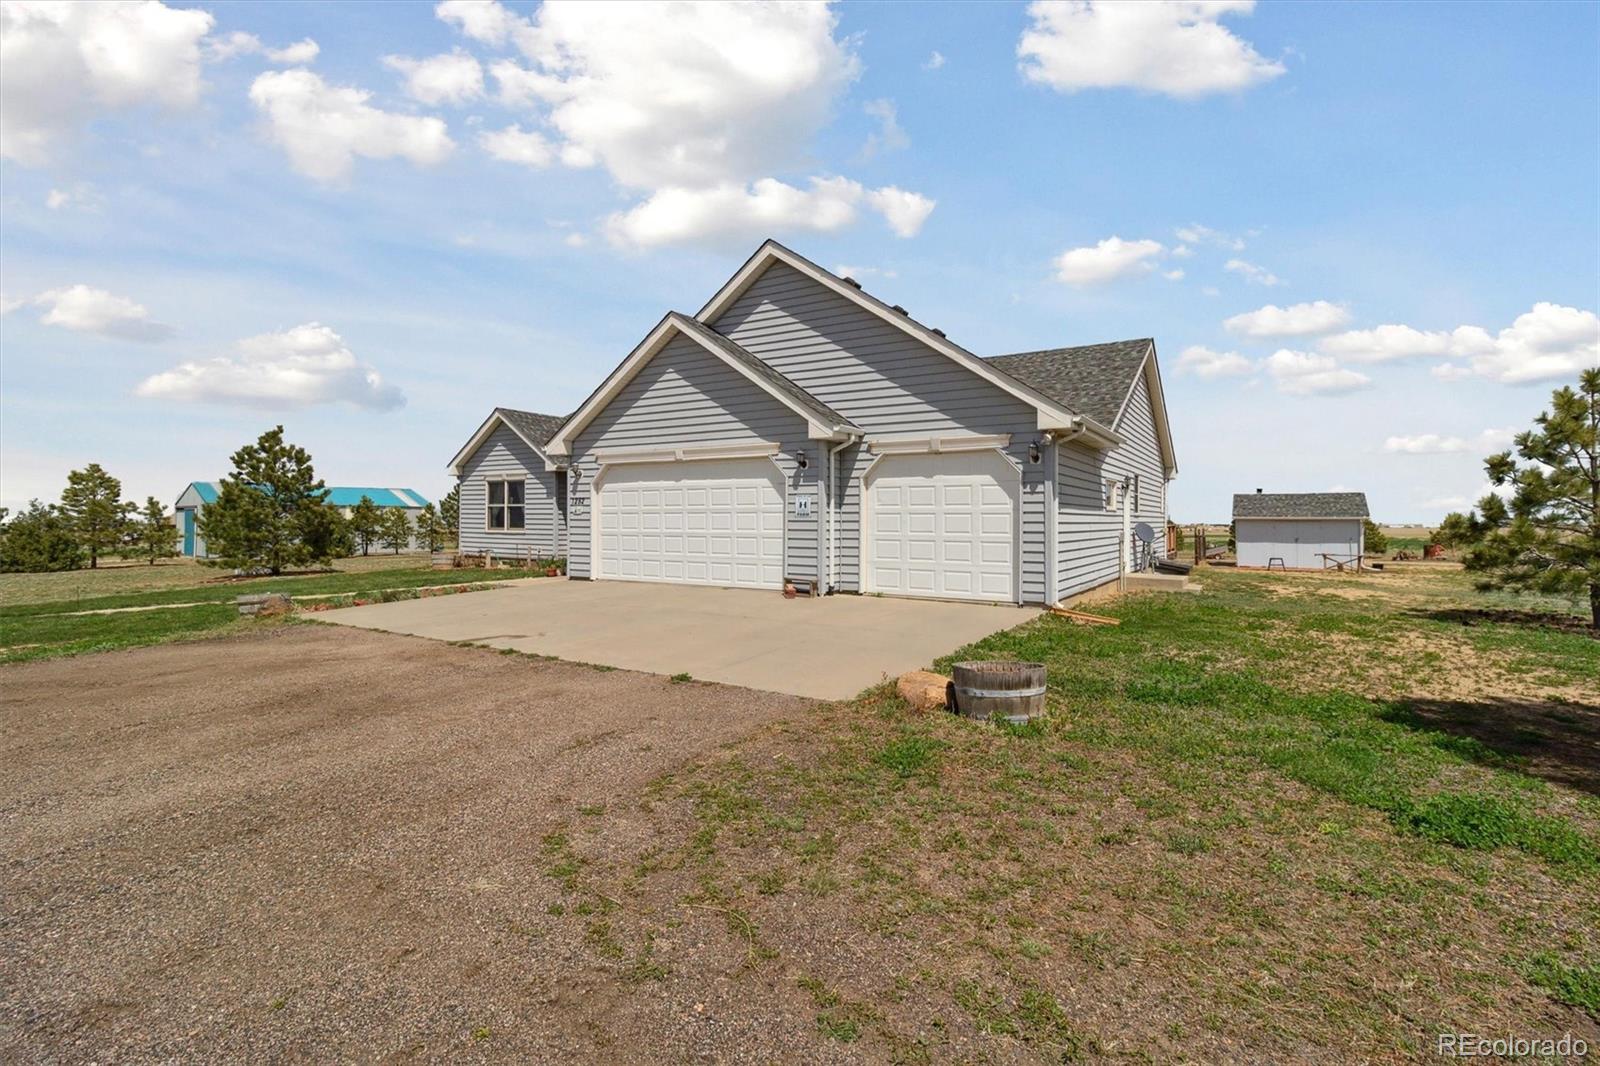 Report Image for 1282 N County Road 125 ,Bennett, Colorado